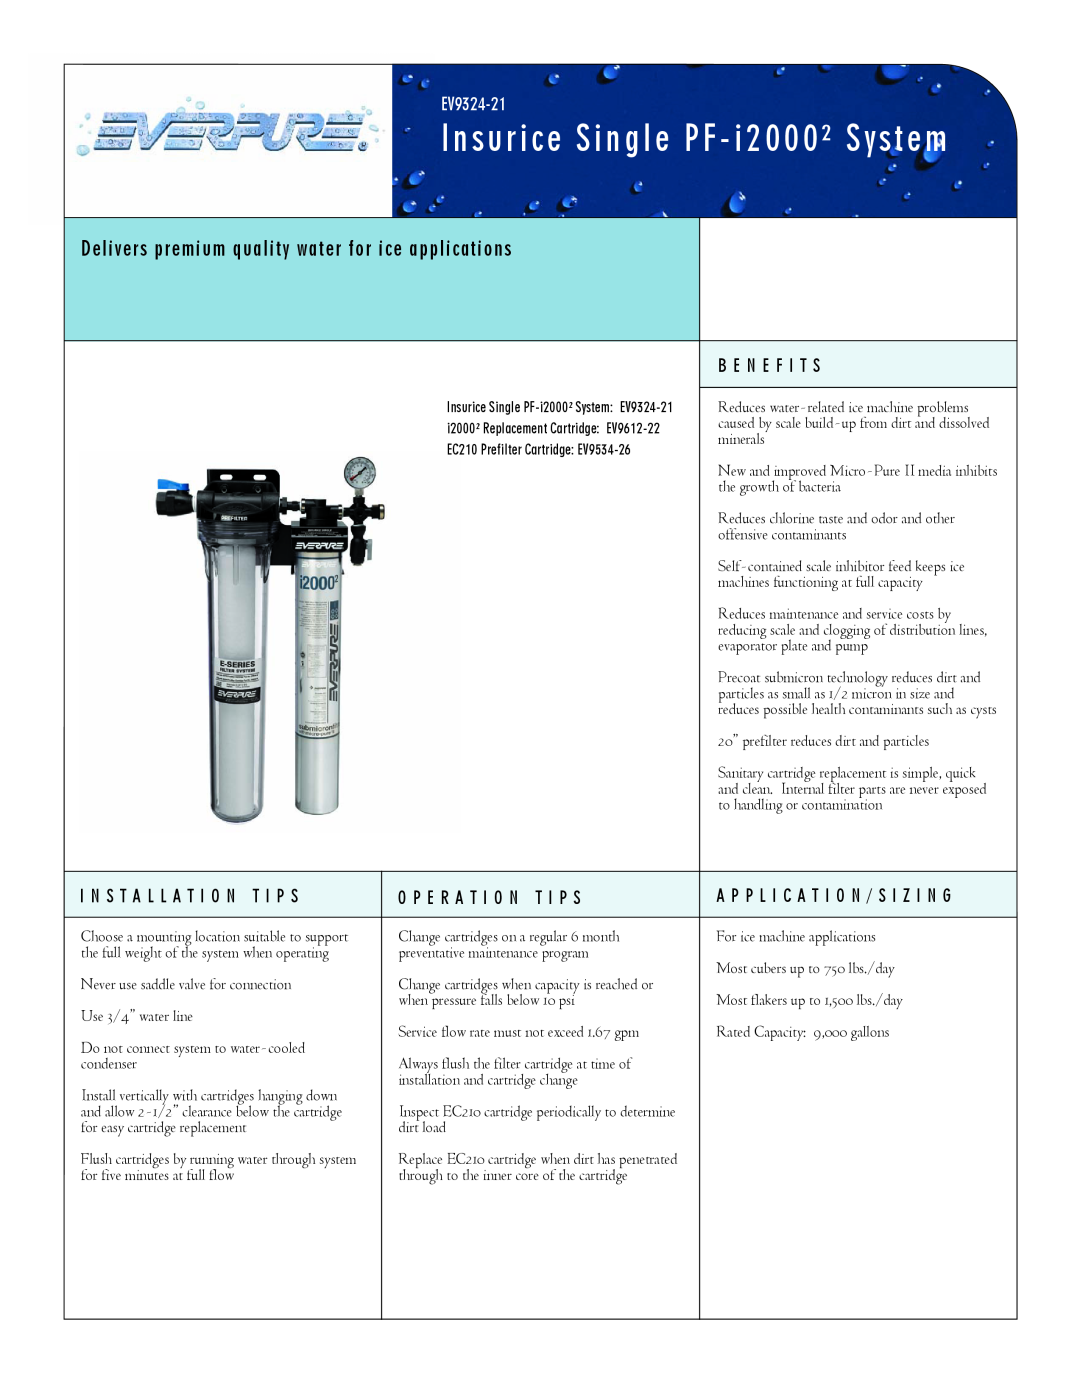 Everpure PF-i2000 manual Insurice Single PF - i2000² System, Delivers premium quality water for ice applications 